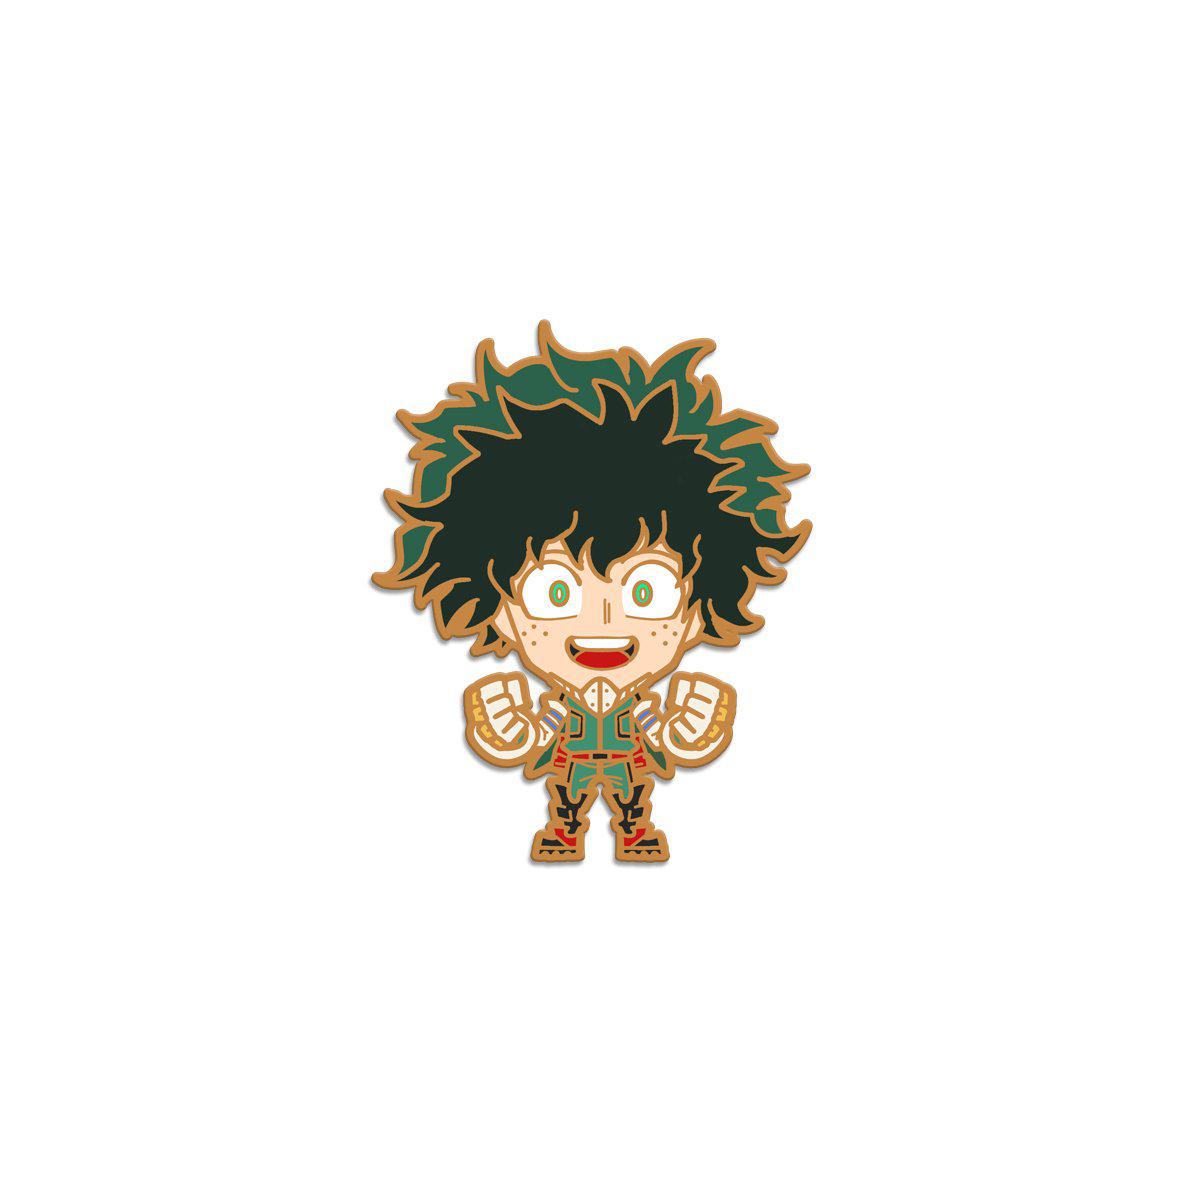 All-for-ONE-for-All Pin Set, Enamel Pin, Hero Academia, AJTouch